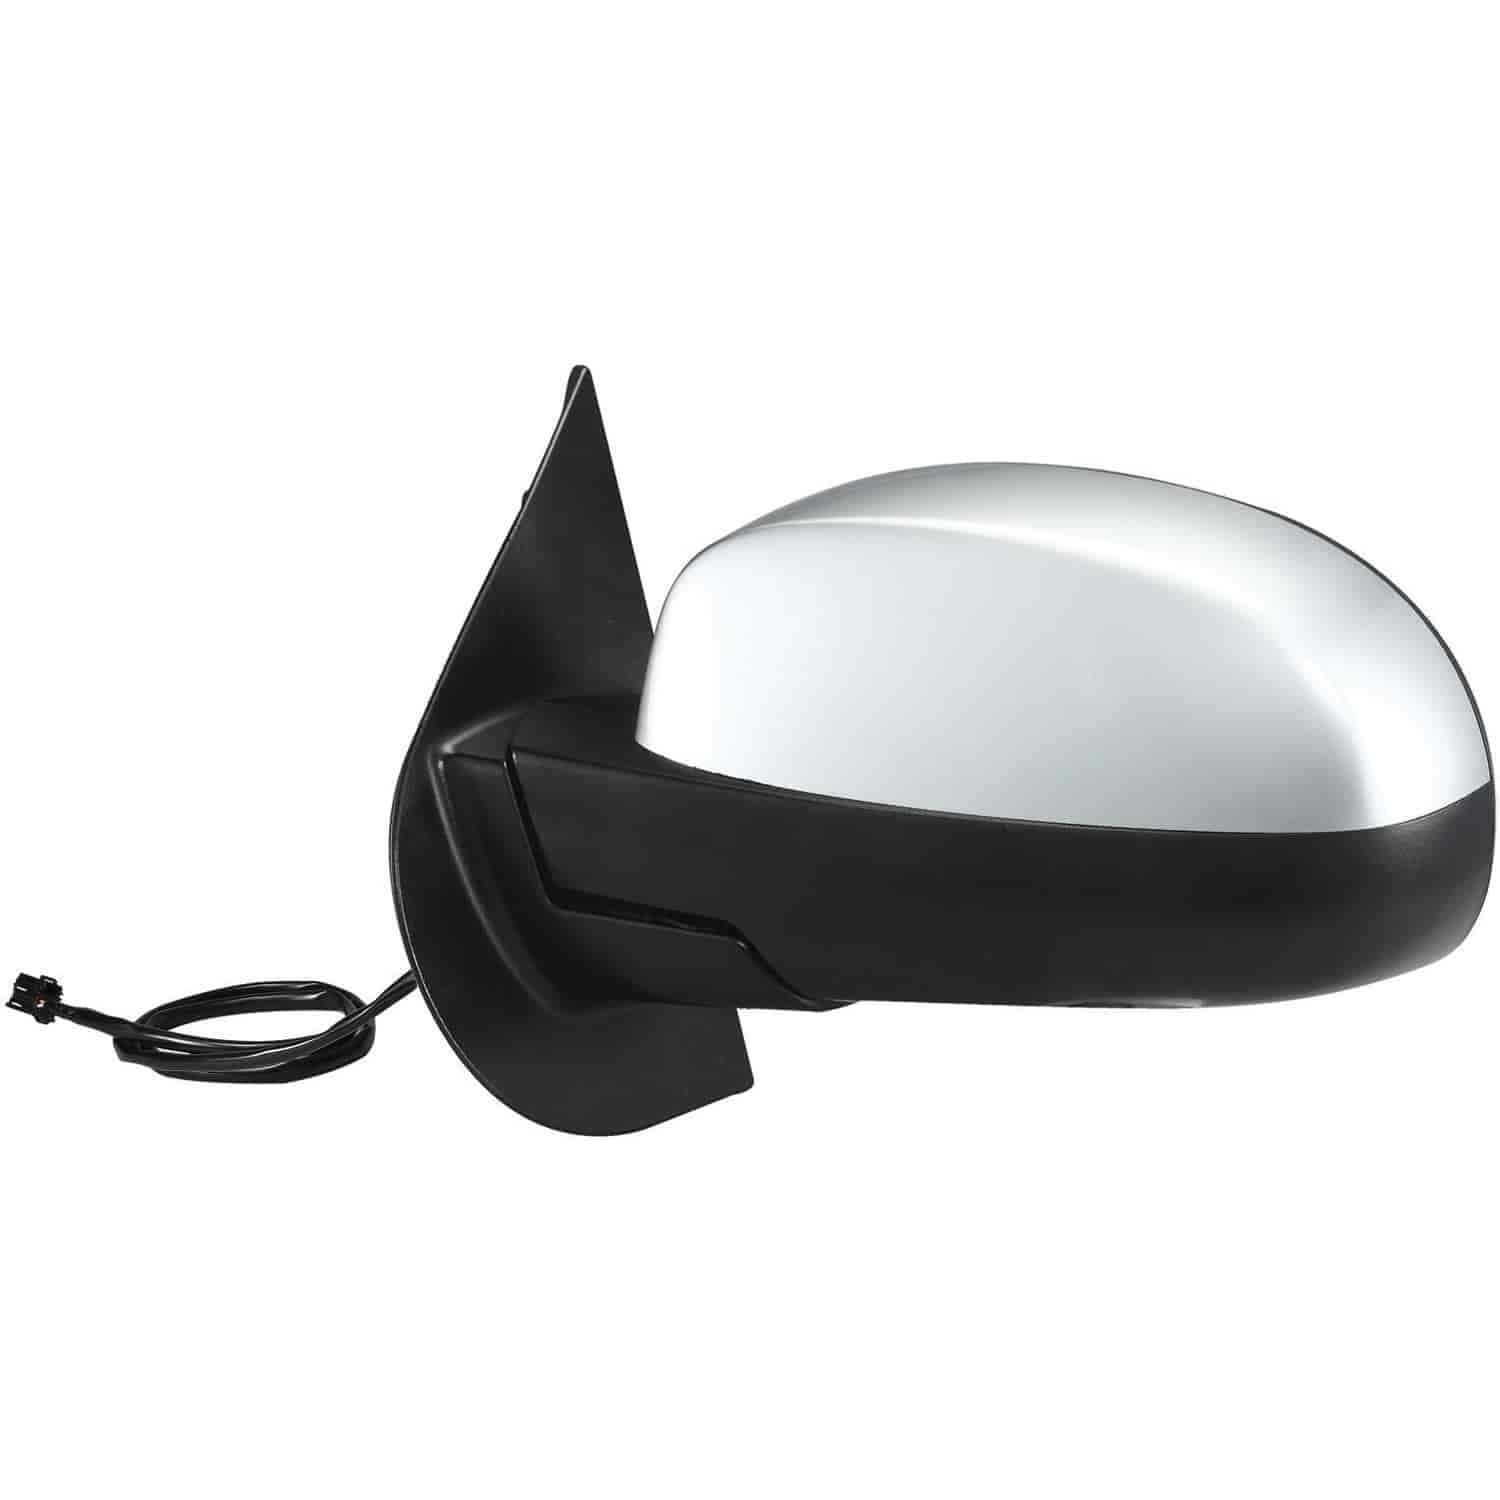 OEM Style Replacement mirror for Repl OEM Style